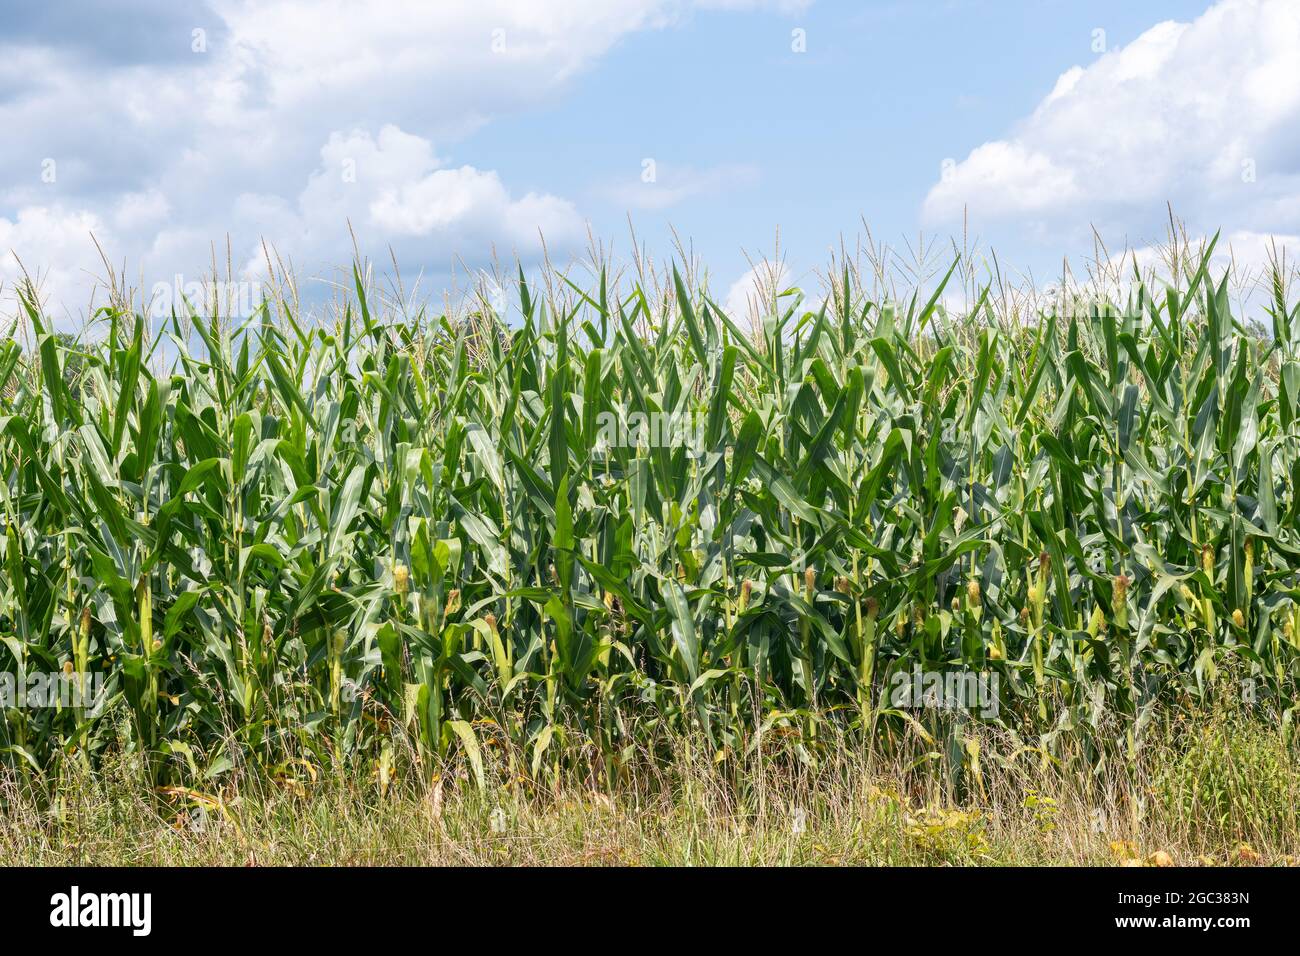 Corn growing in a farm field with a cloudy sky in the background Stock Photo